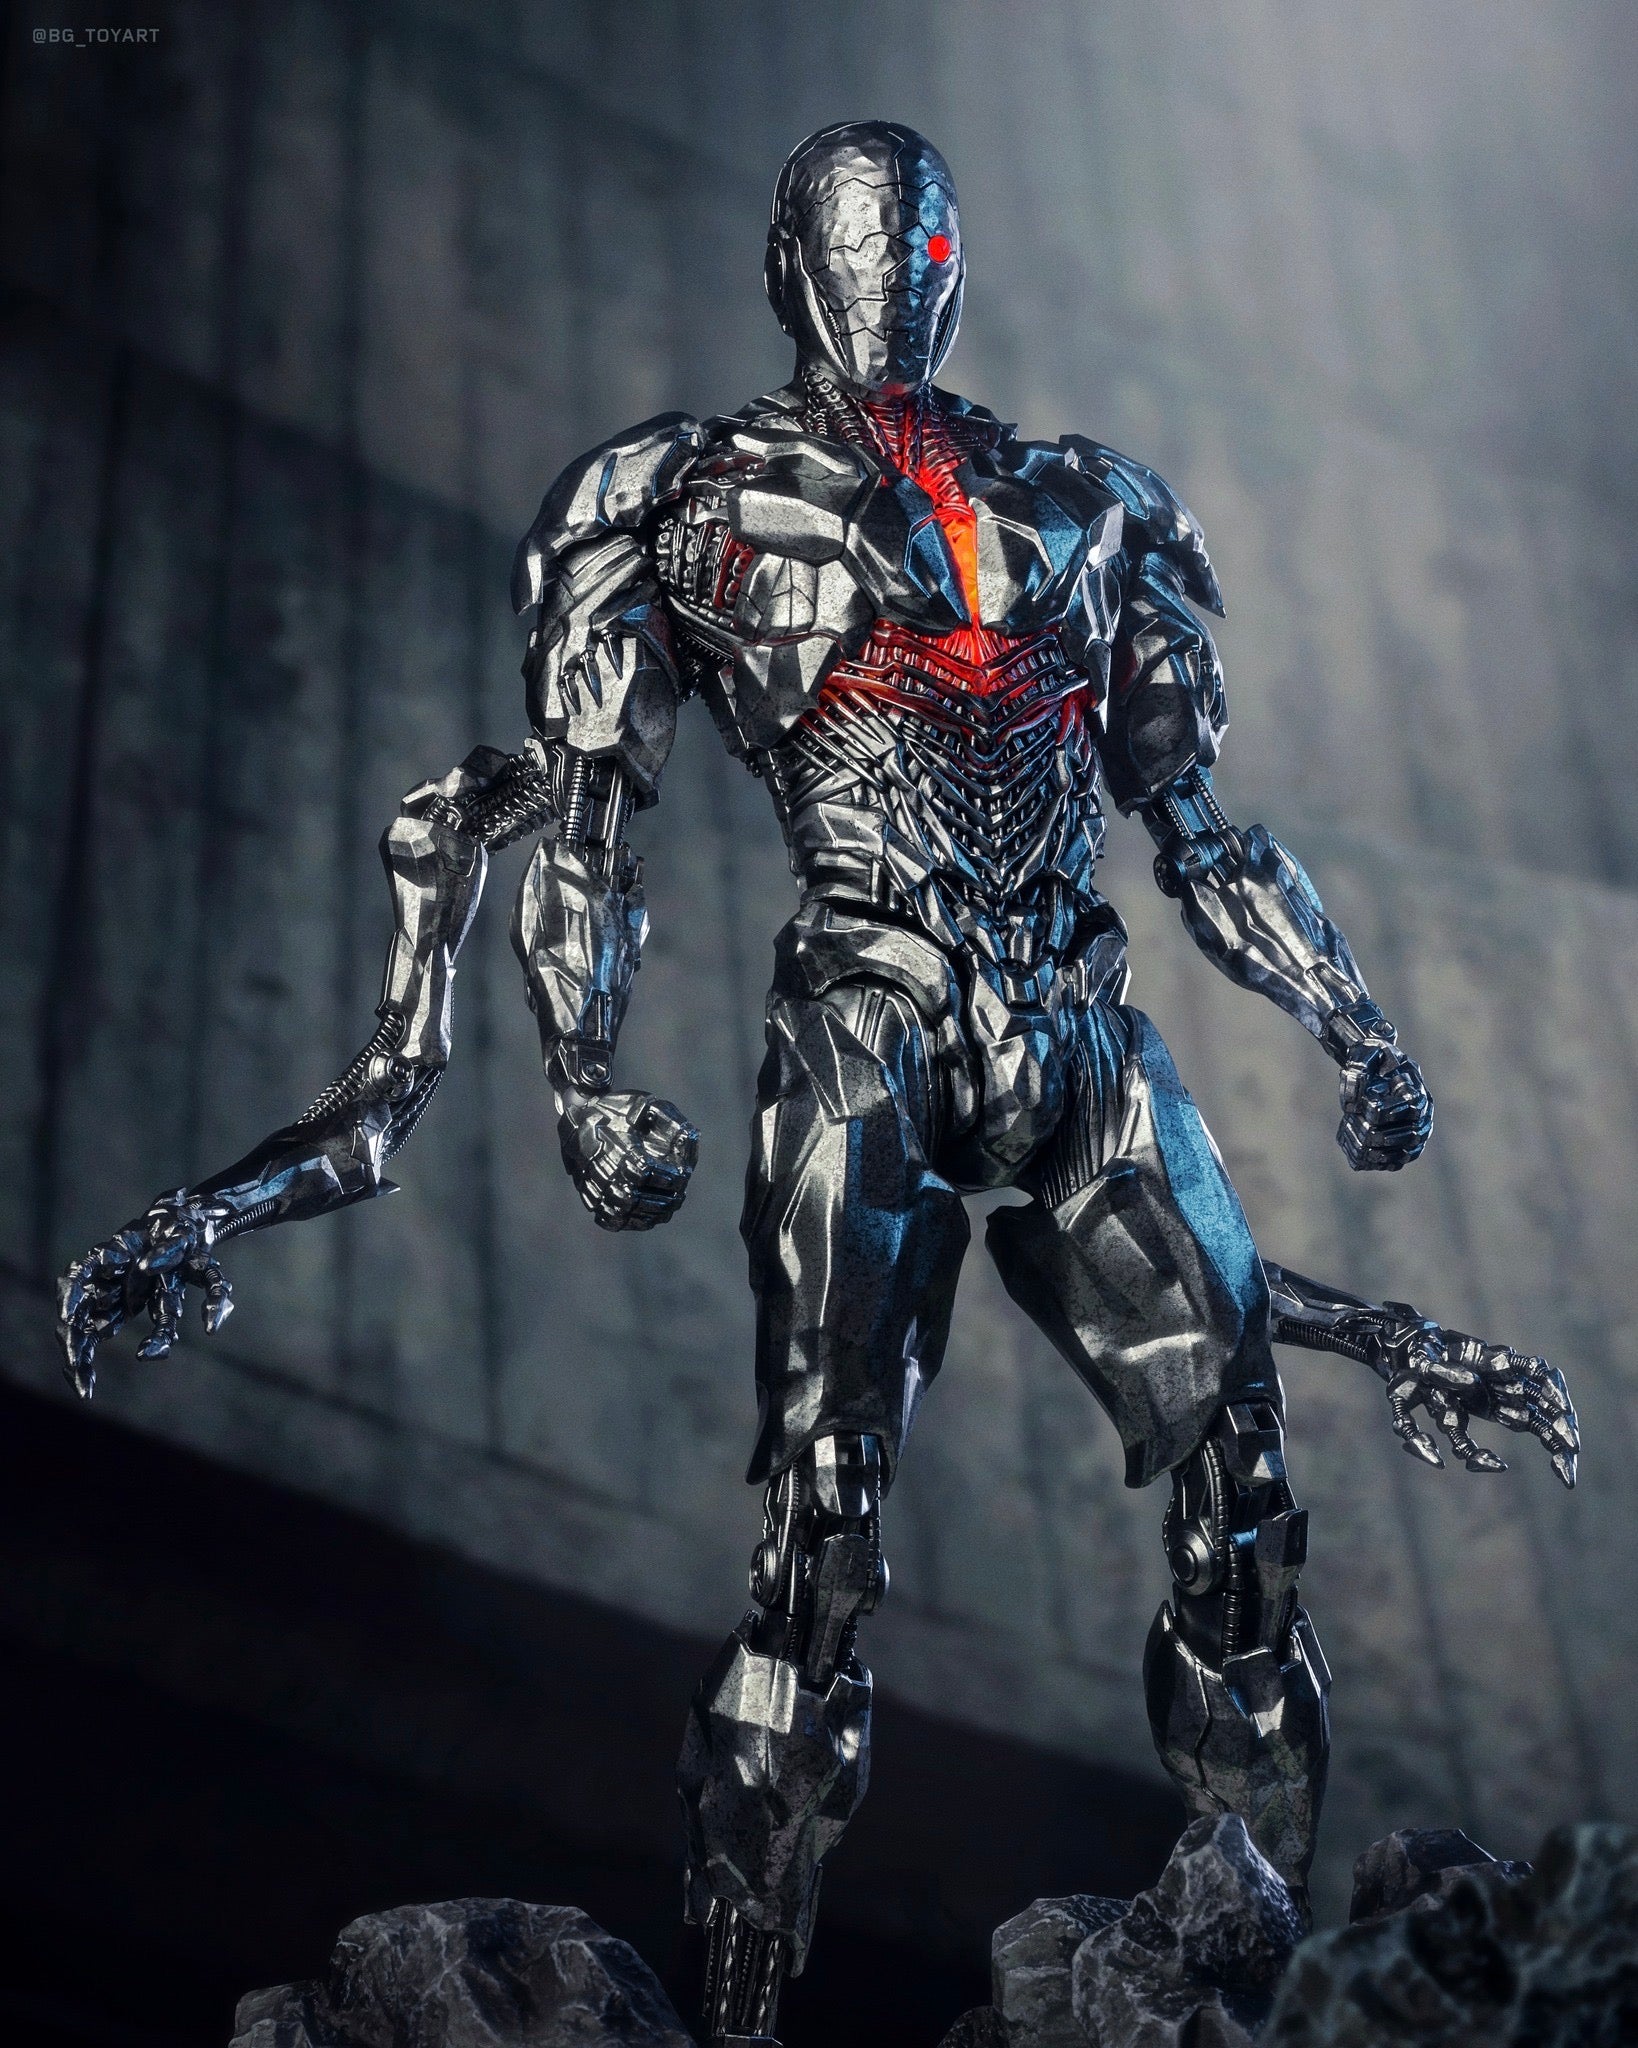 Hot Toys TMS057 Zack Snyder's Justice League Cyborg 1/6 Scale